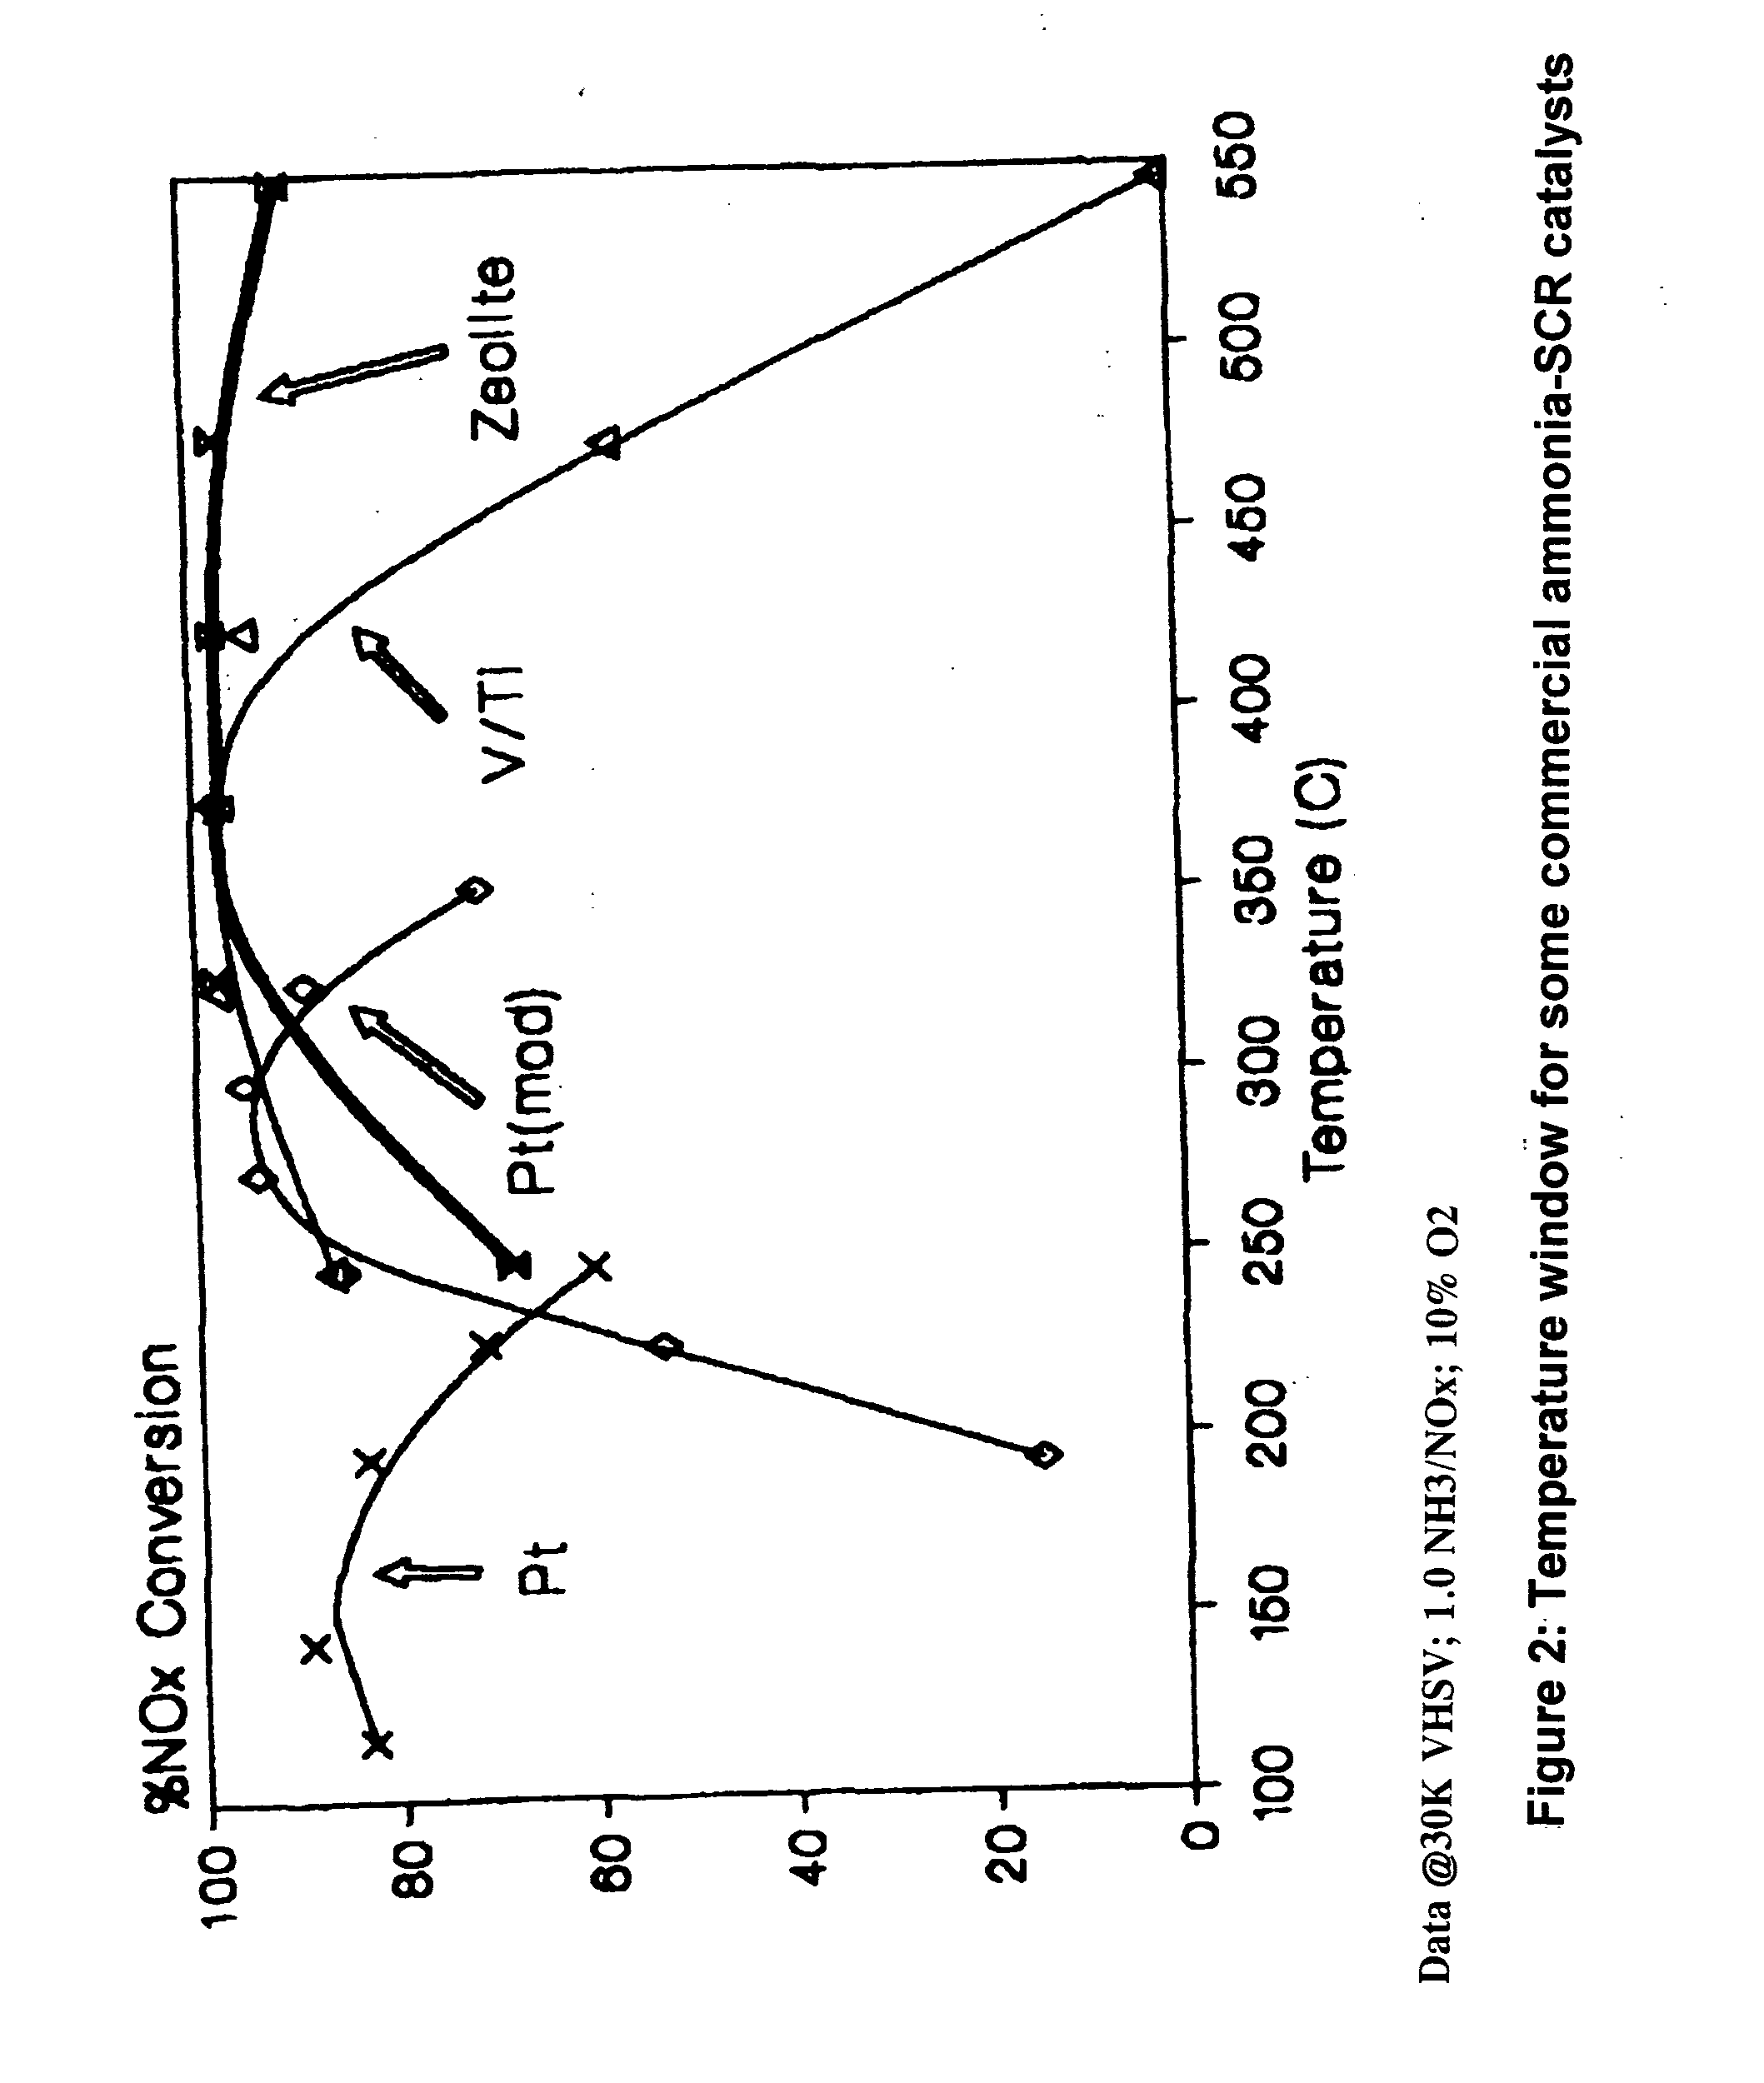 Emission reduction system for use with a heat recovery steam generation system